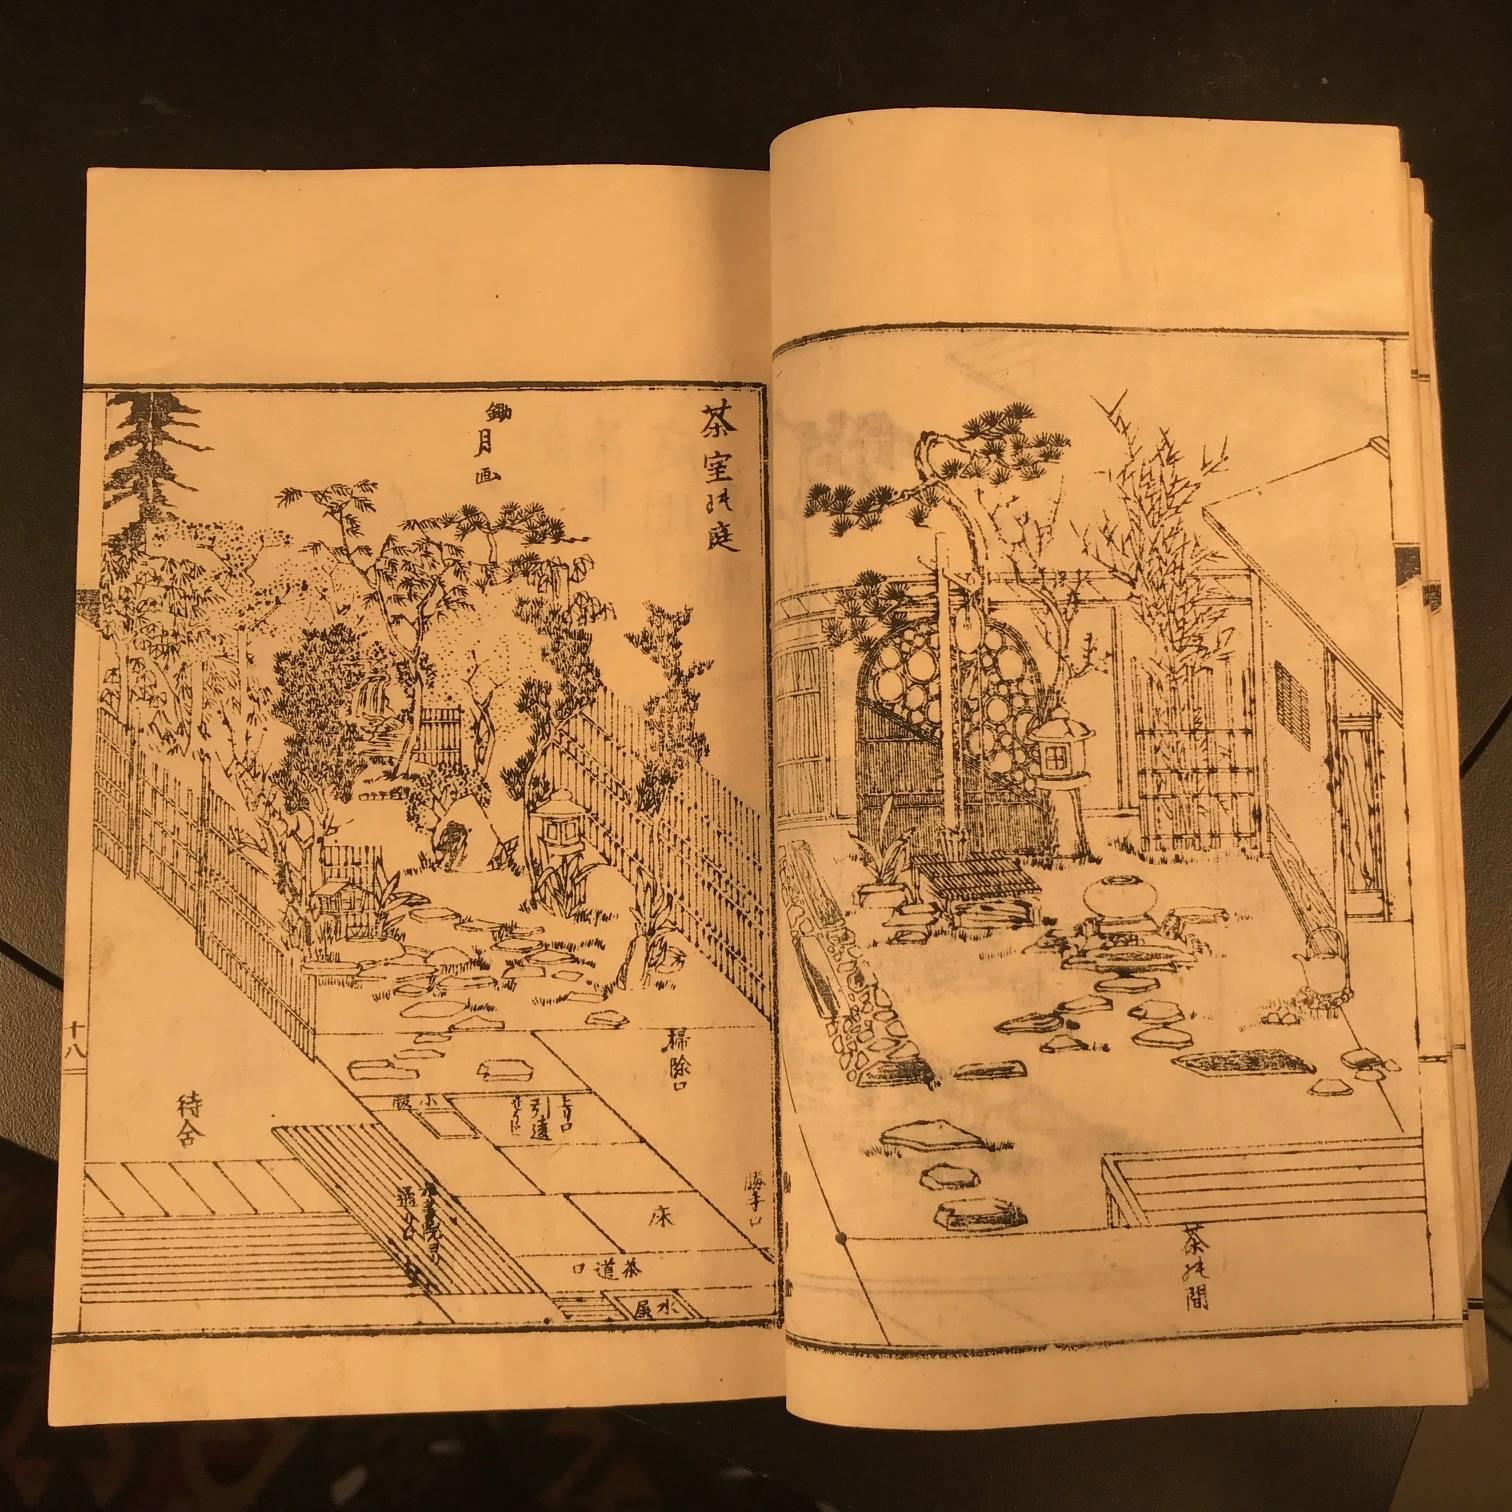 Paper Japan Antique Garden Plans and Designs 154 Woodblock Prints in Three Albums Mint